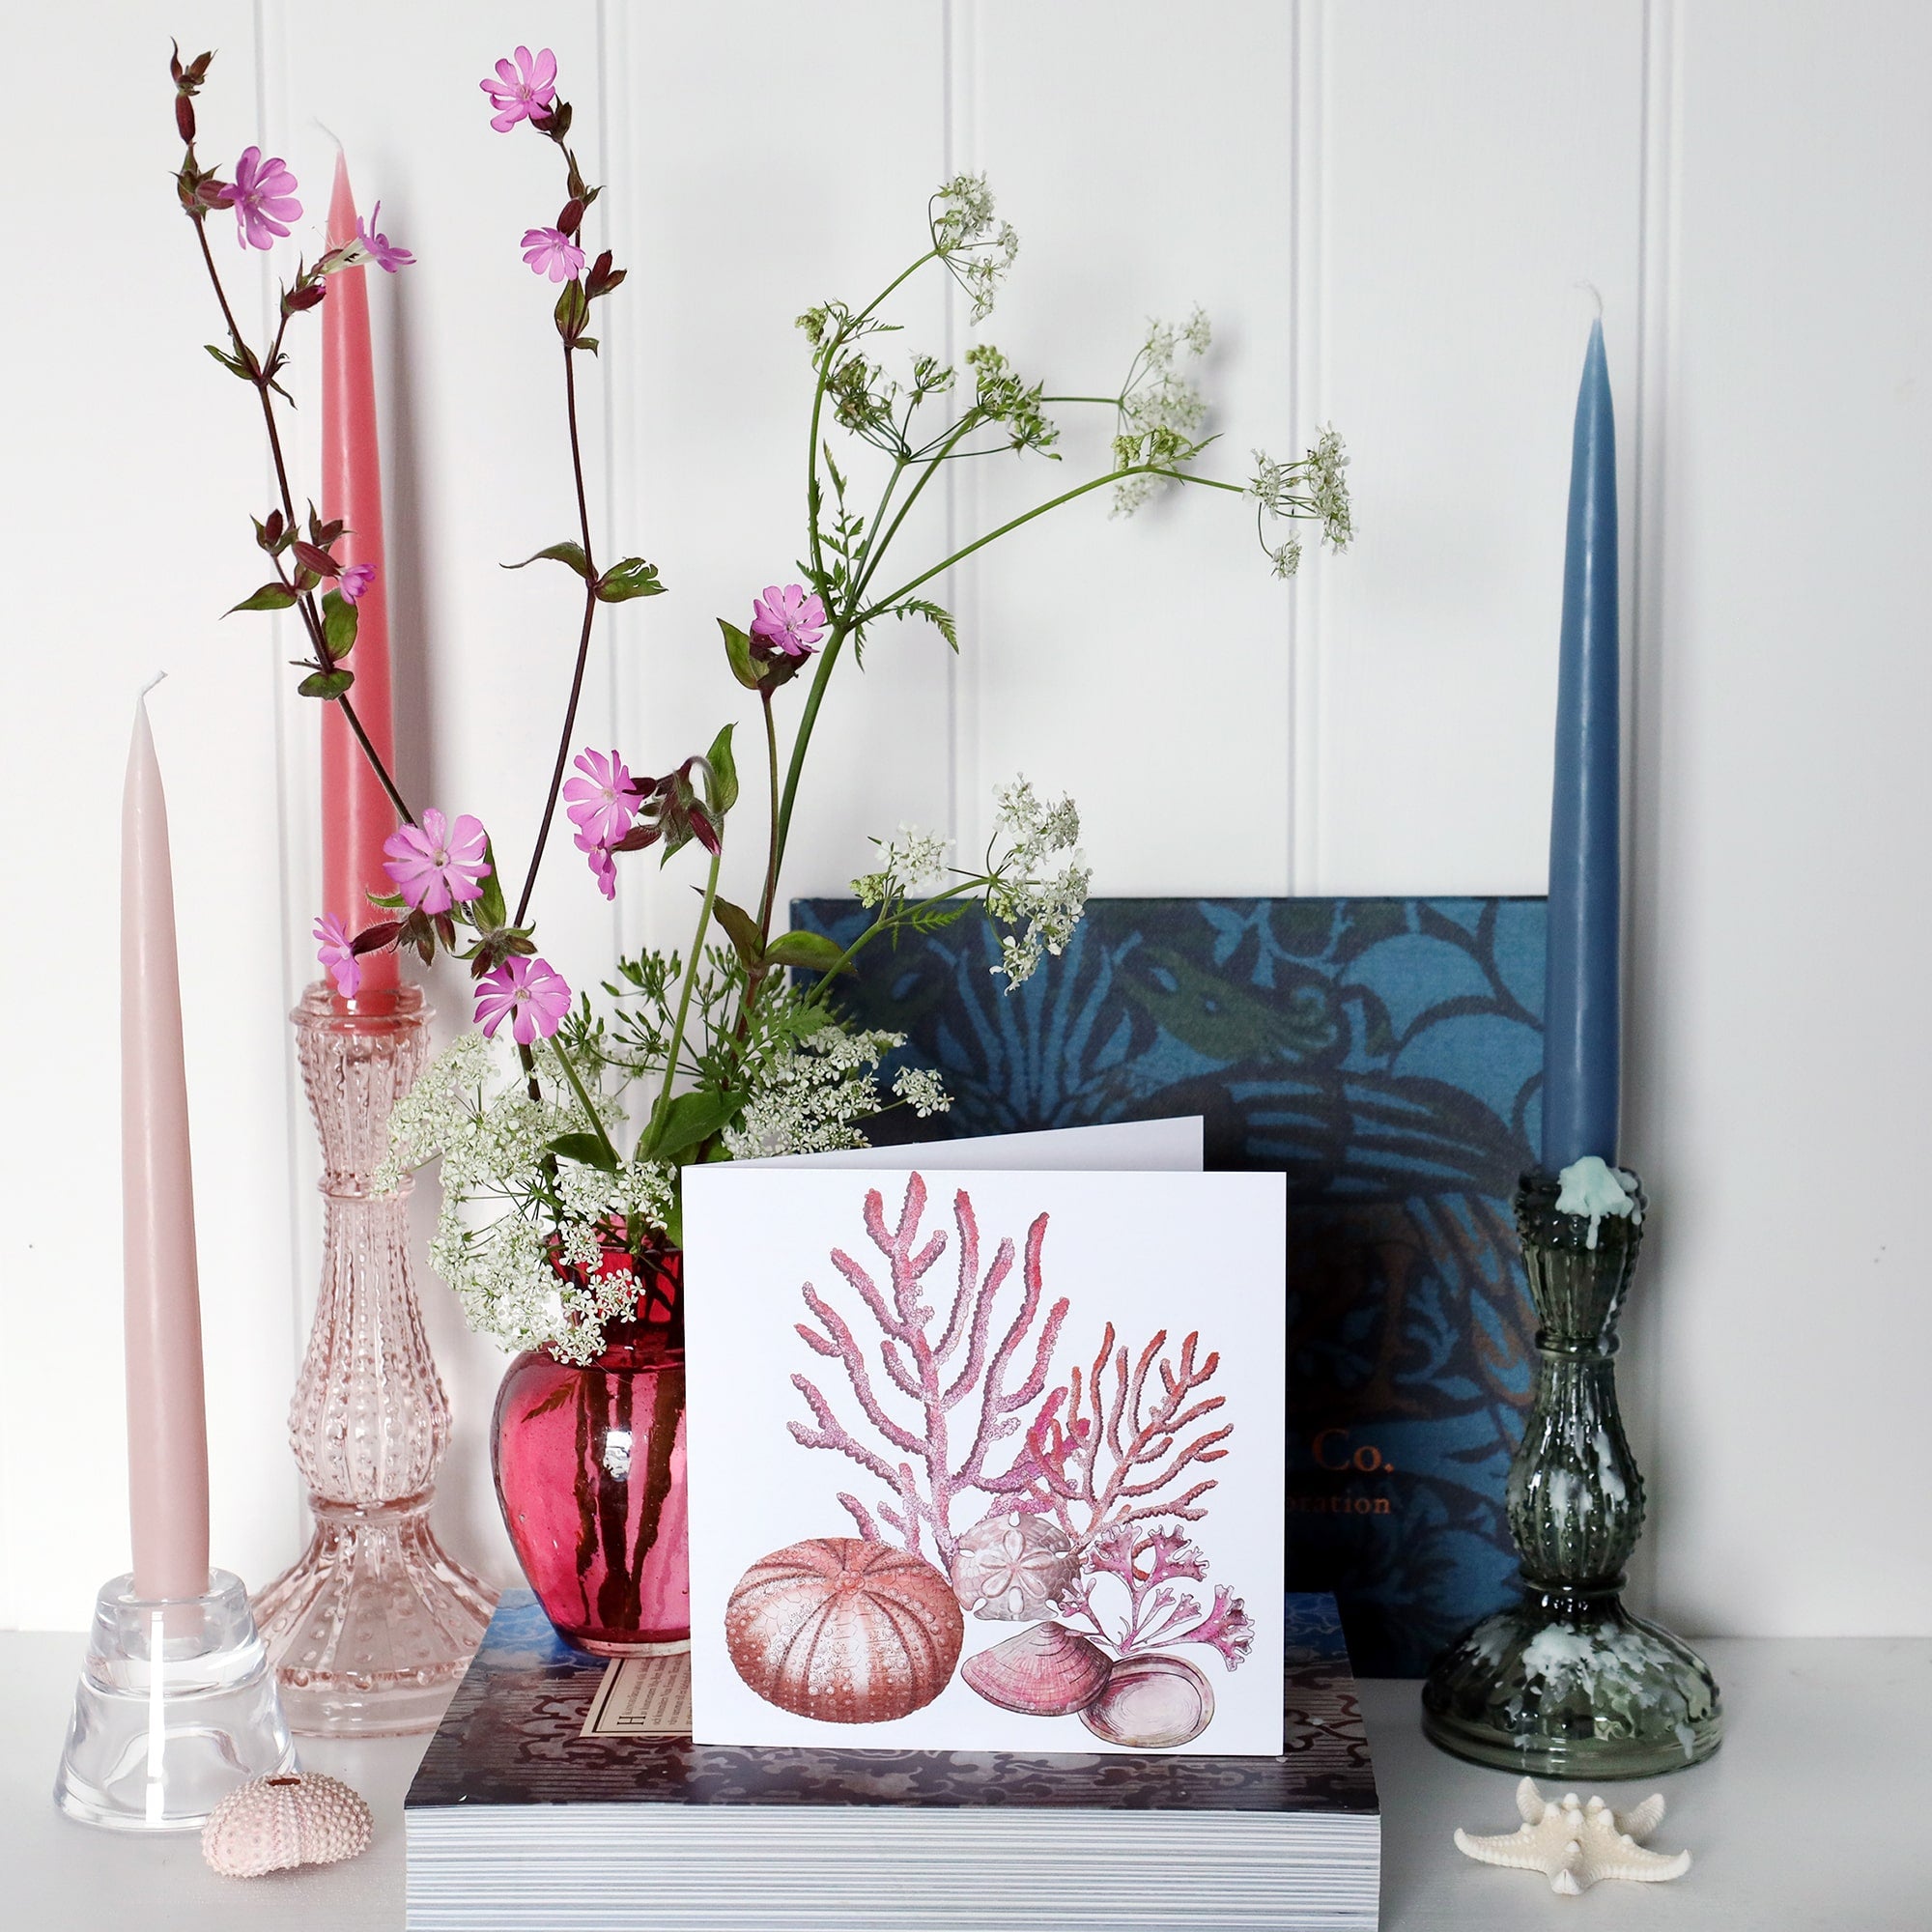 greeting card with illustration of corals, sea urchin, sand dollar and seaweed all in pinks  on a white background on shelf with pink and blue candles in candlesticks and a small cranberry glass jug with wild flowers in